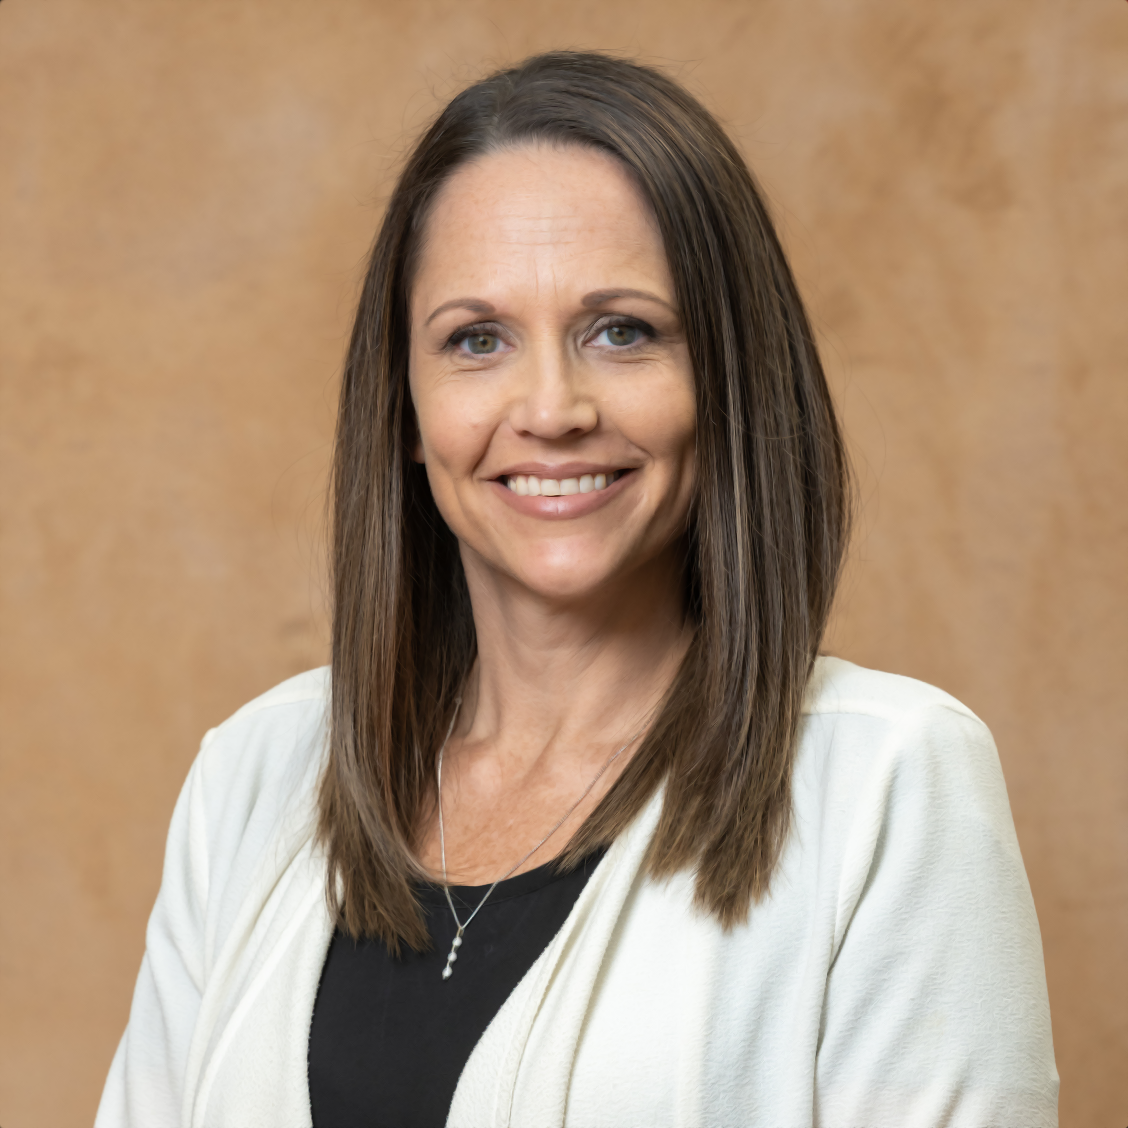 Dr Julee La Mott is the Clinical Director of SA Psychology and Wellness